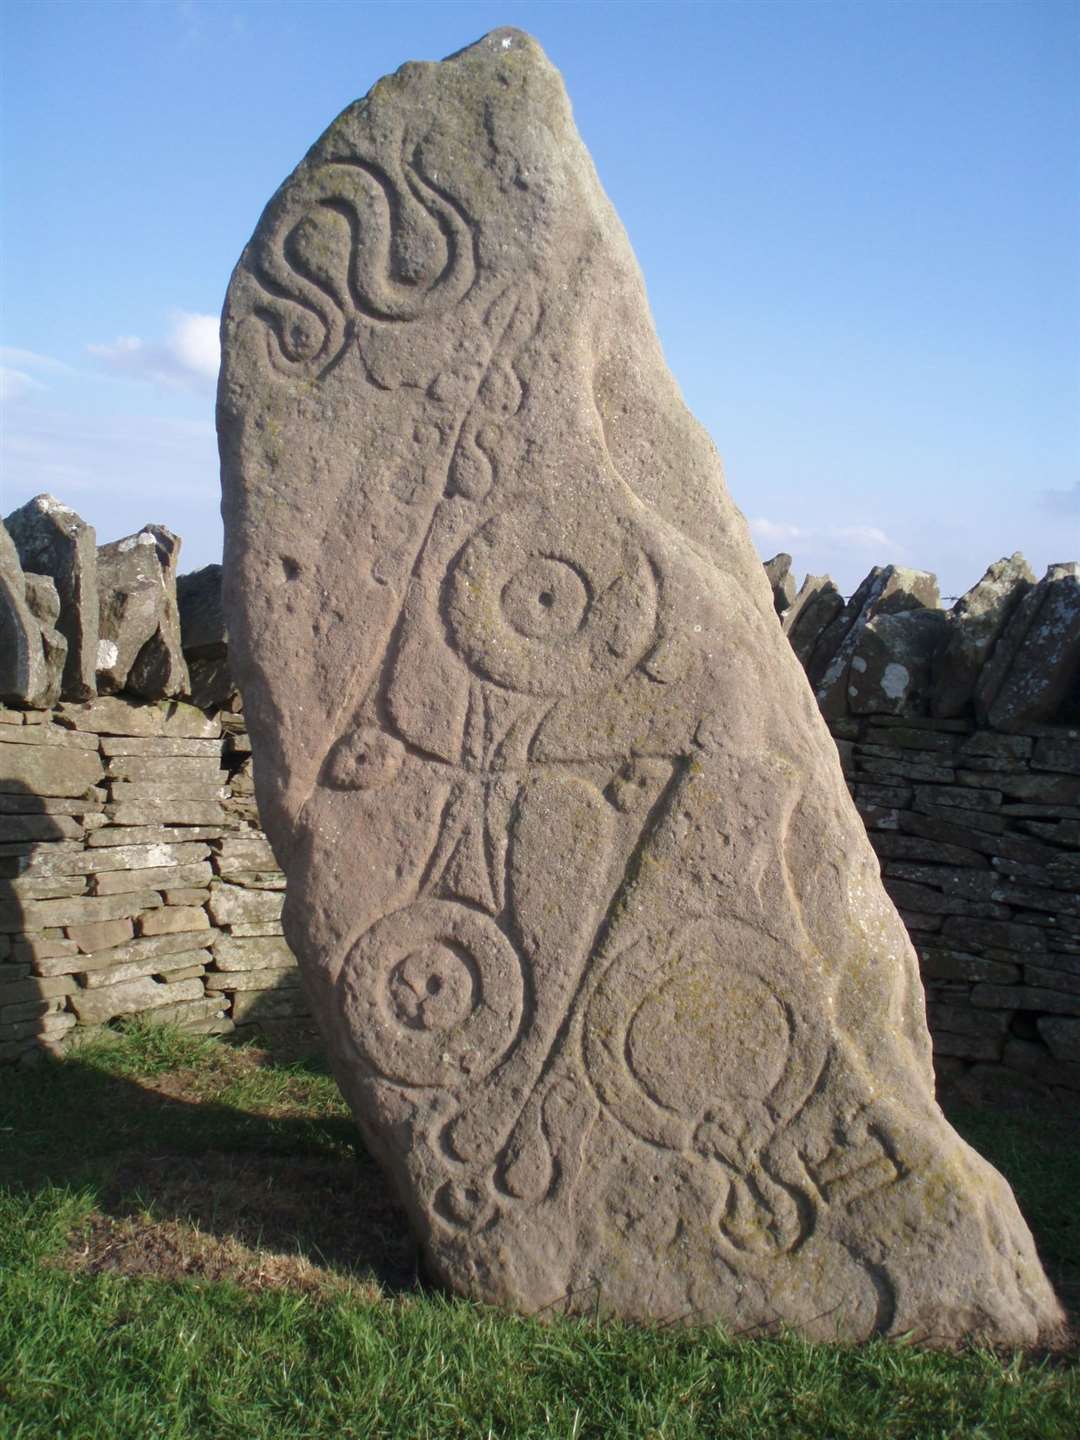 A Scottish stone with Pictish carvings.